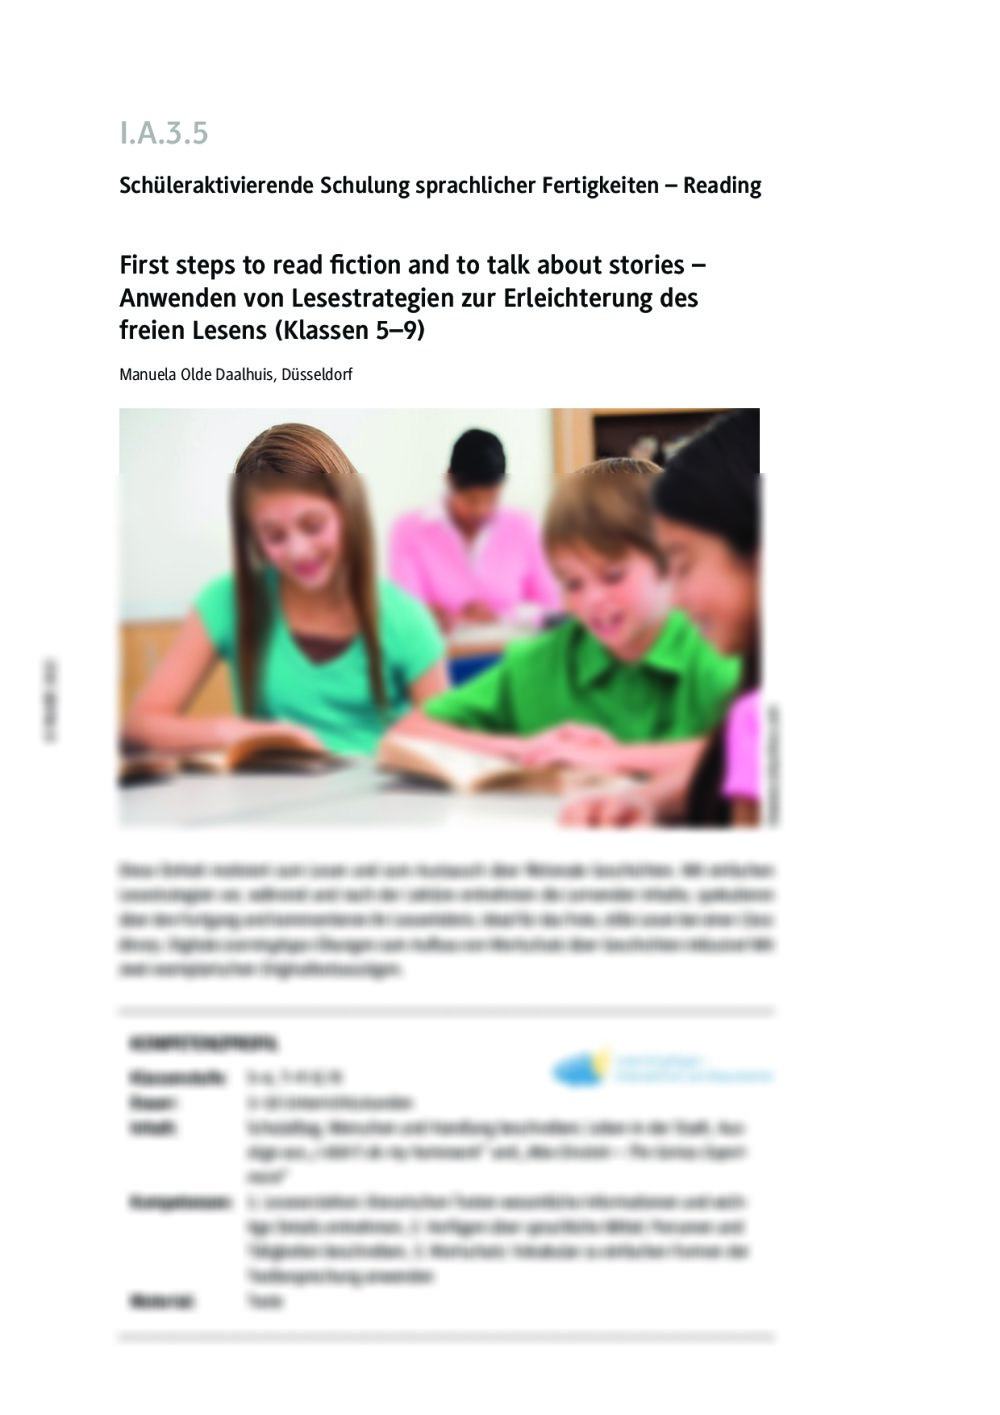 First steps to read fiction and to talk about stories - Seite 1